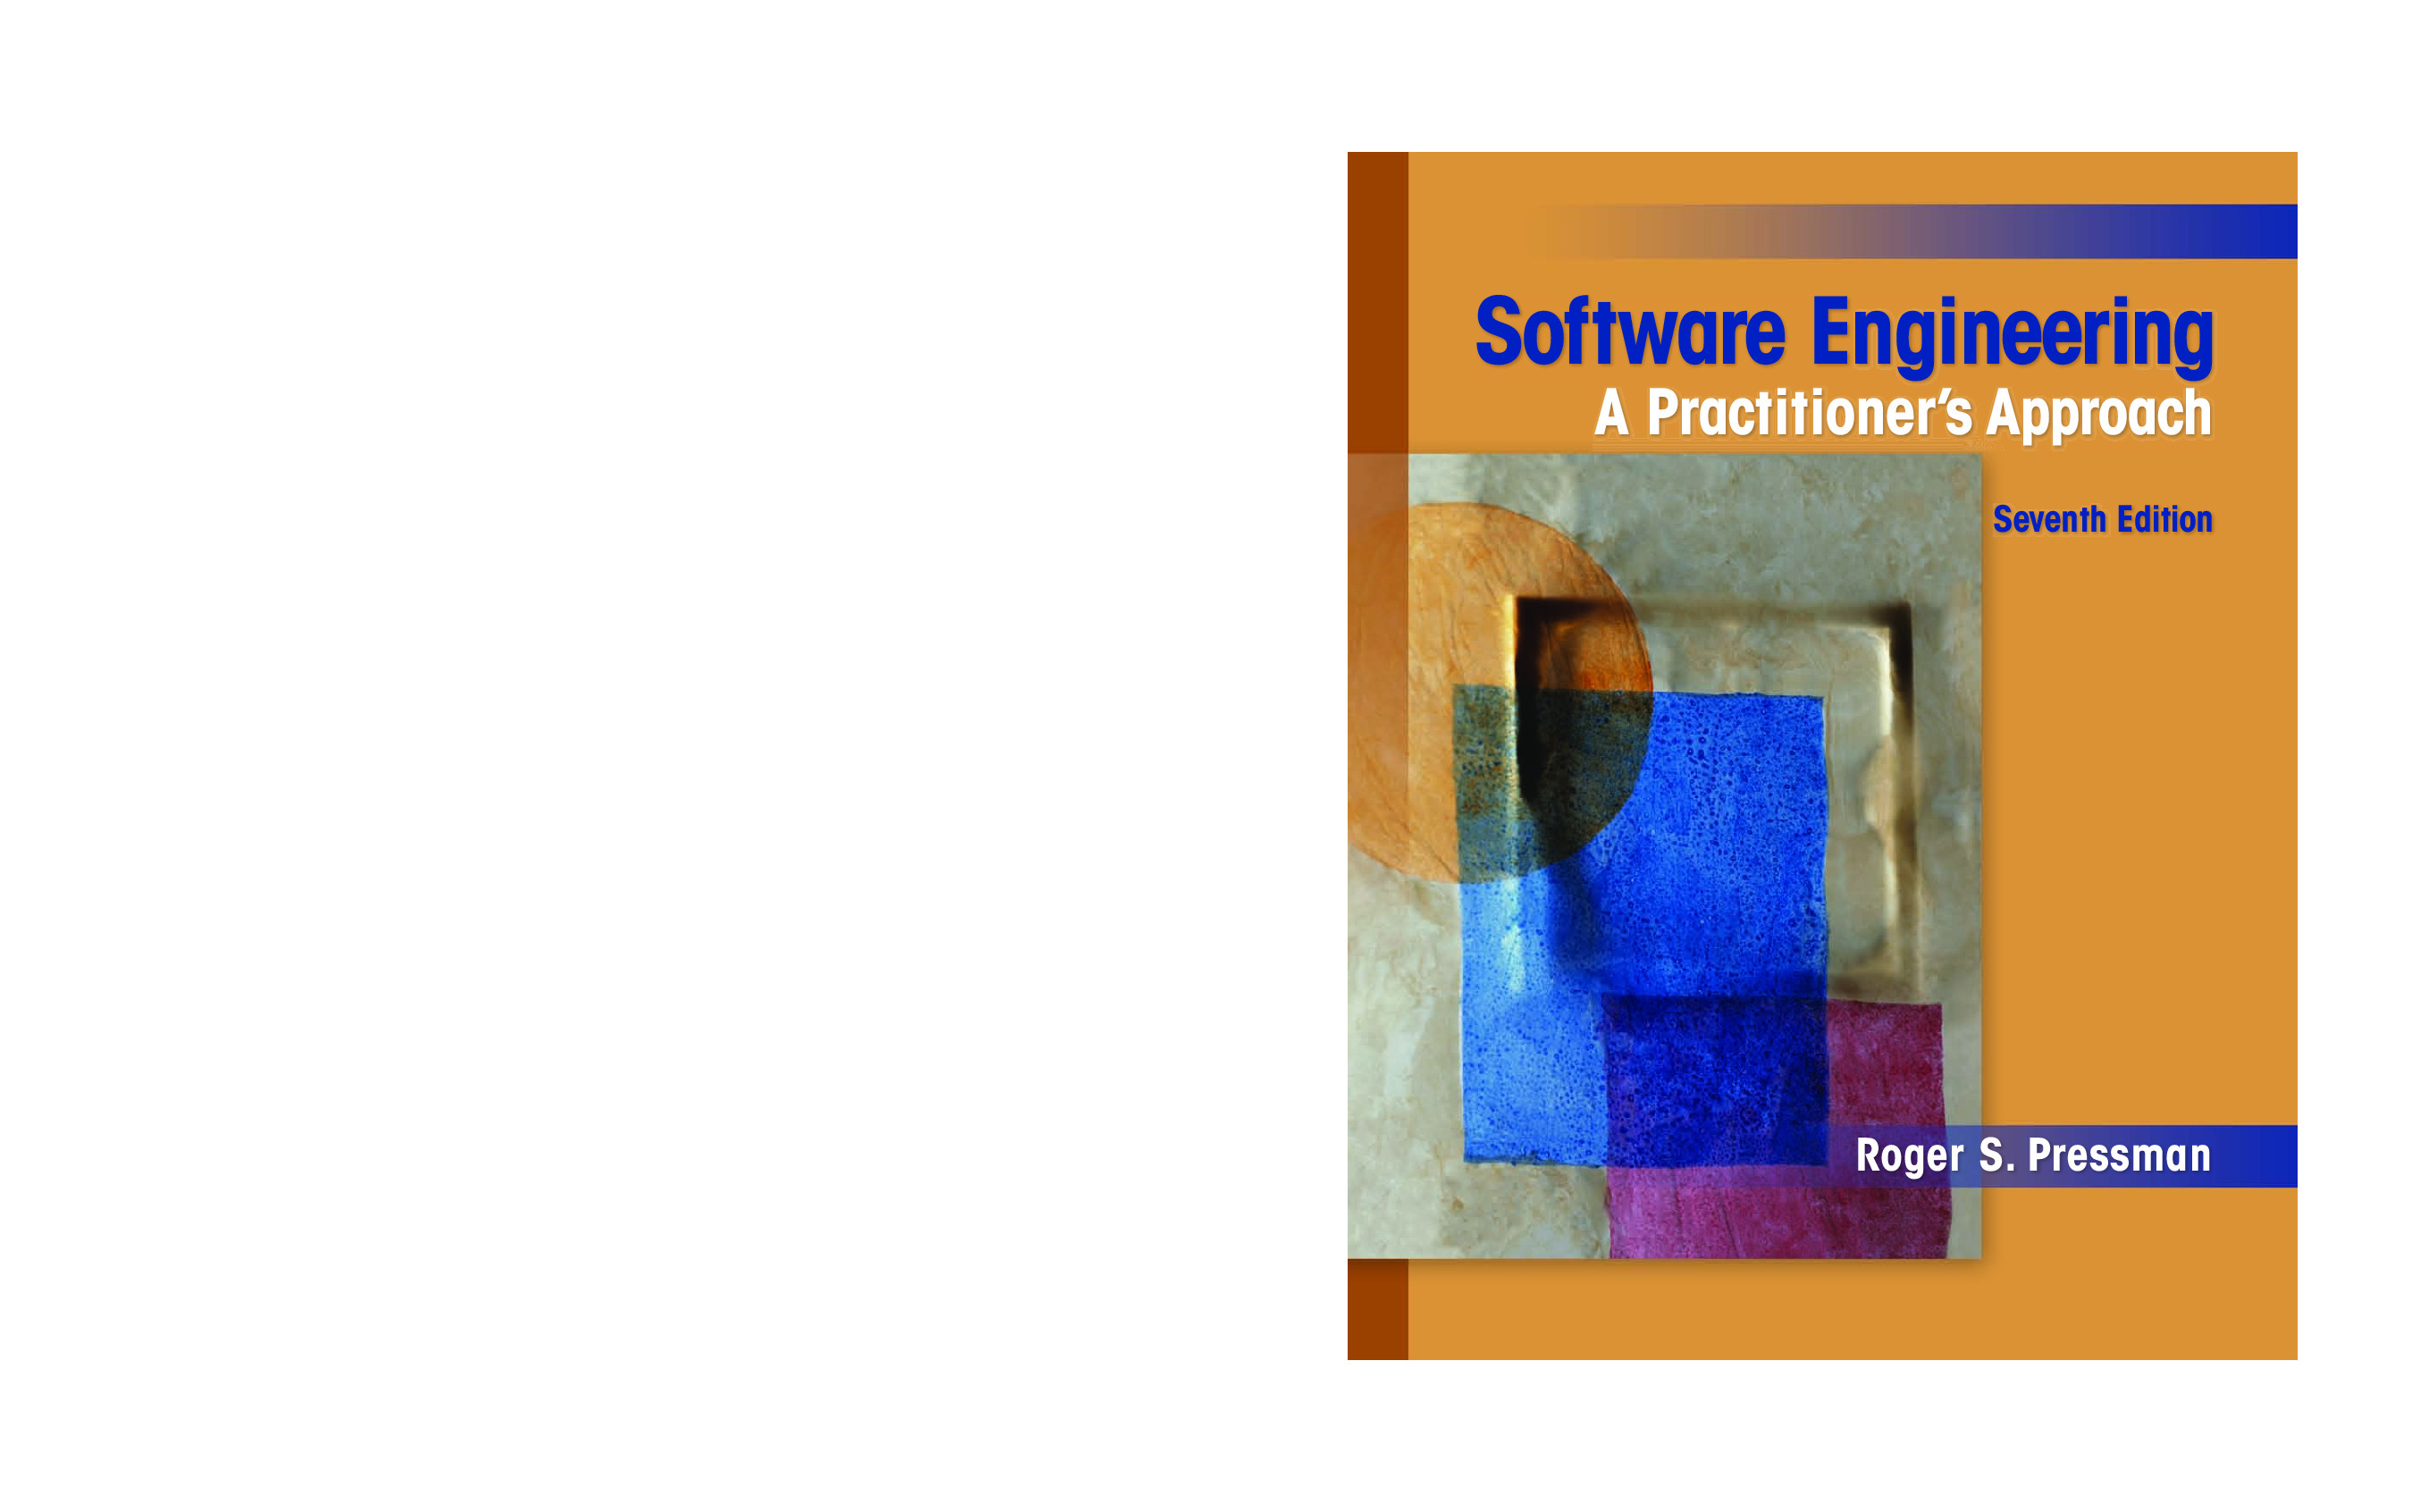 Software Engineering A Practitioner’s Approach 7th Edition – Roger Pressman